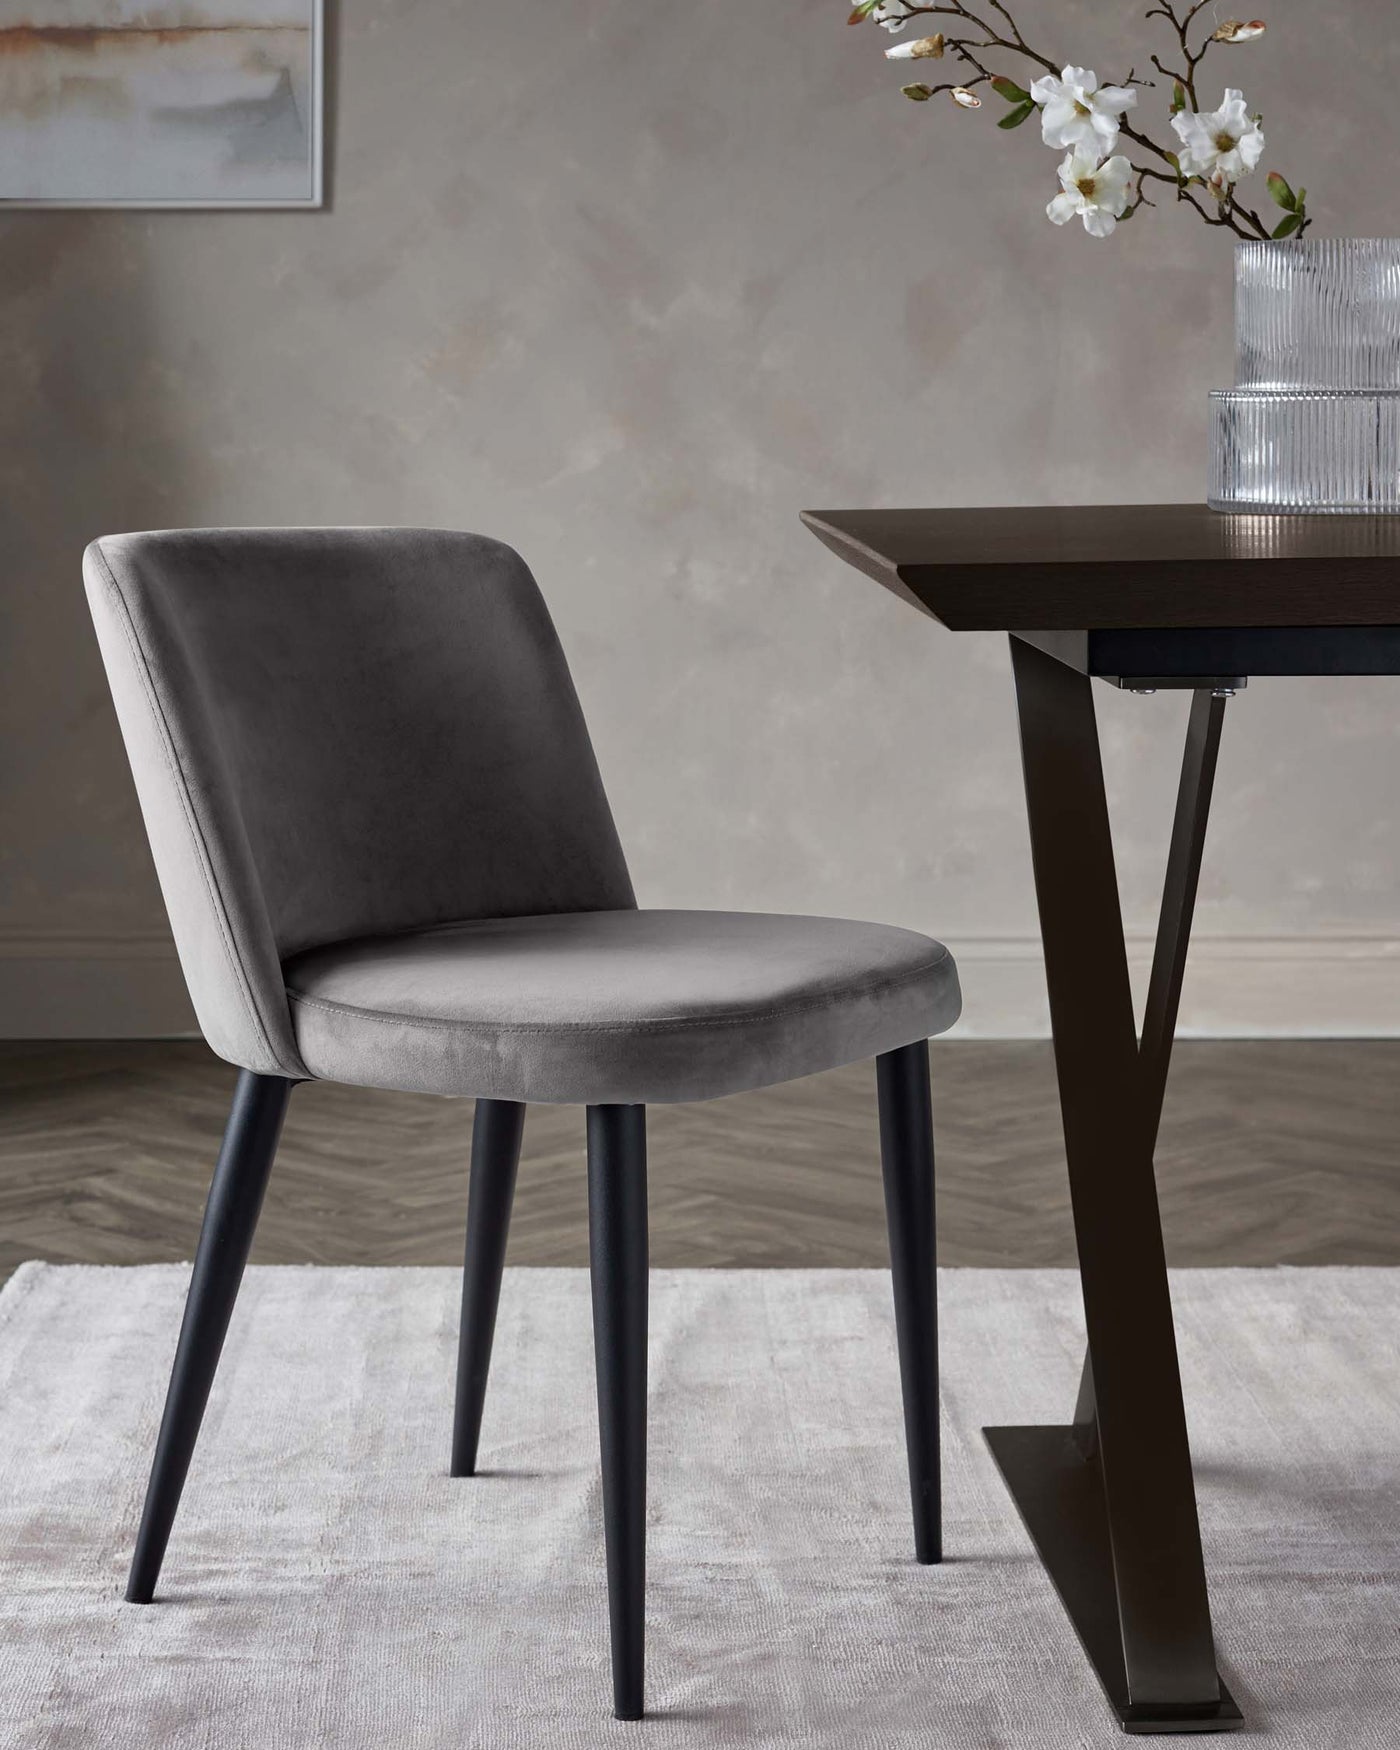 Elegant modern furniture featuring a dining chair with a curved back design and plush grey velvet upholstery, supported by four sleek, tapered black metal legs. Adjacent is a contemporary dark wooden table with an angular base showcasing a minimalist aesthetic. A light area rug under the chair complements the set.